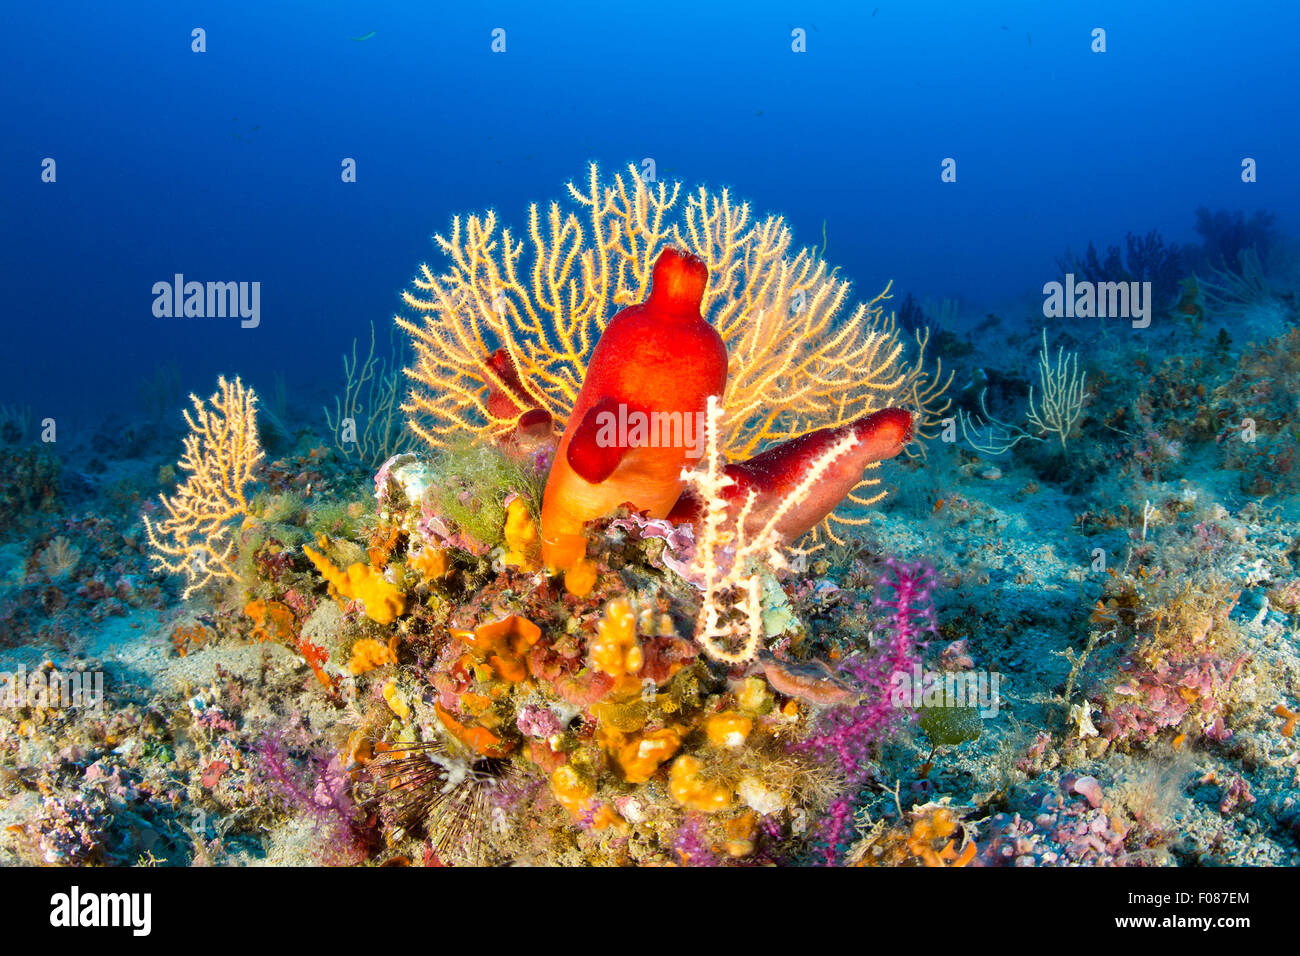 Red Sea Squirt in Coral Reef, Halocynthia papillosa, Massa Lubrense, Campania, Italy Stock Photo